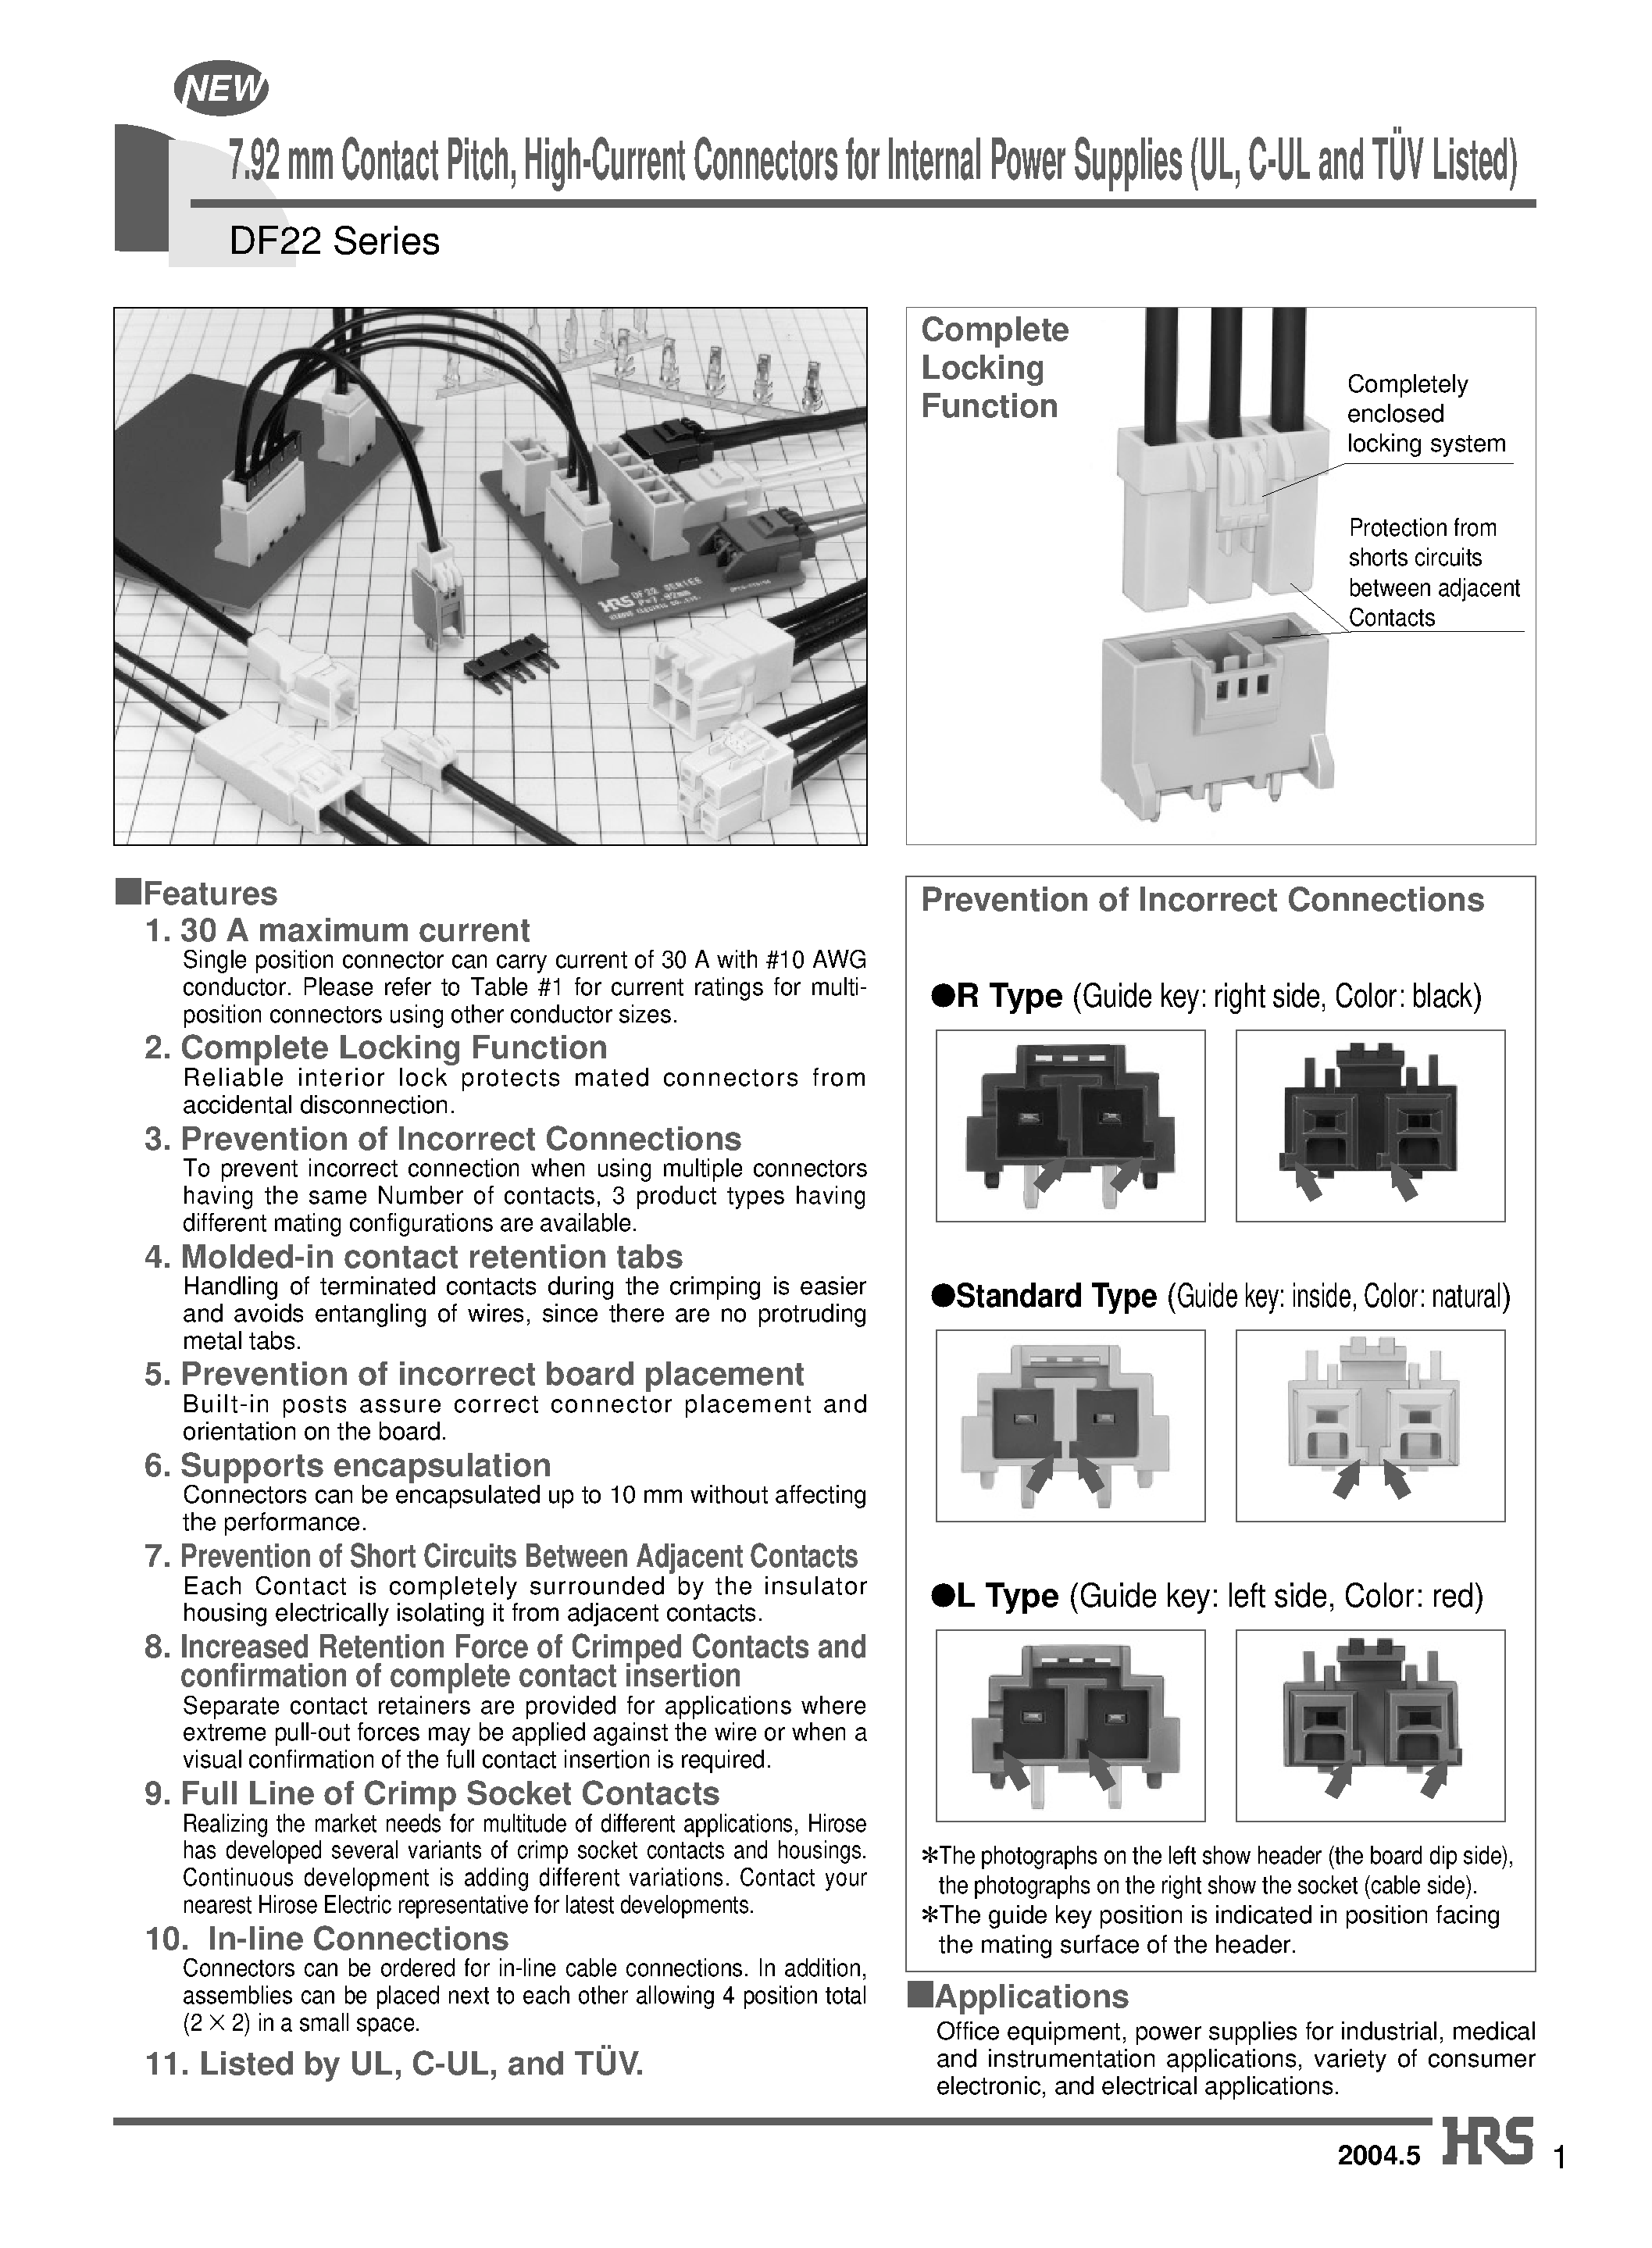 Даташит DF22AR-1P-7.92DSA - 7.92 mm Contact Pitch/ High-Current Connectors for Internal Power Supplies (UL/ C-UL and TUV Listed) страница 1